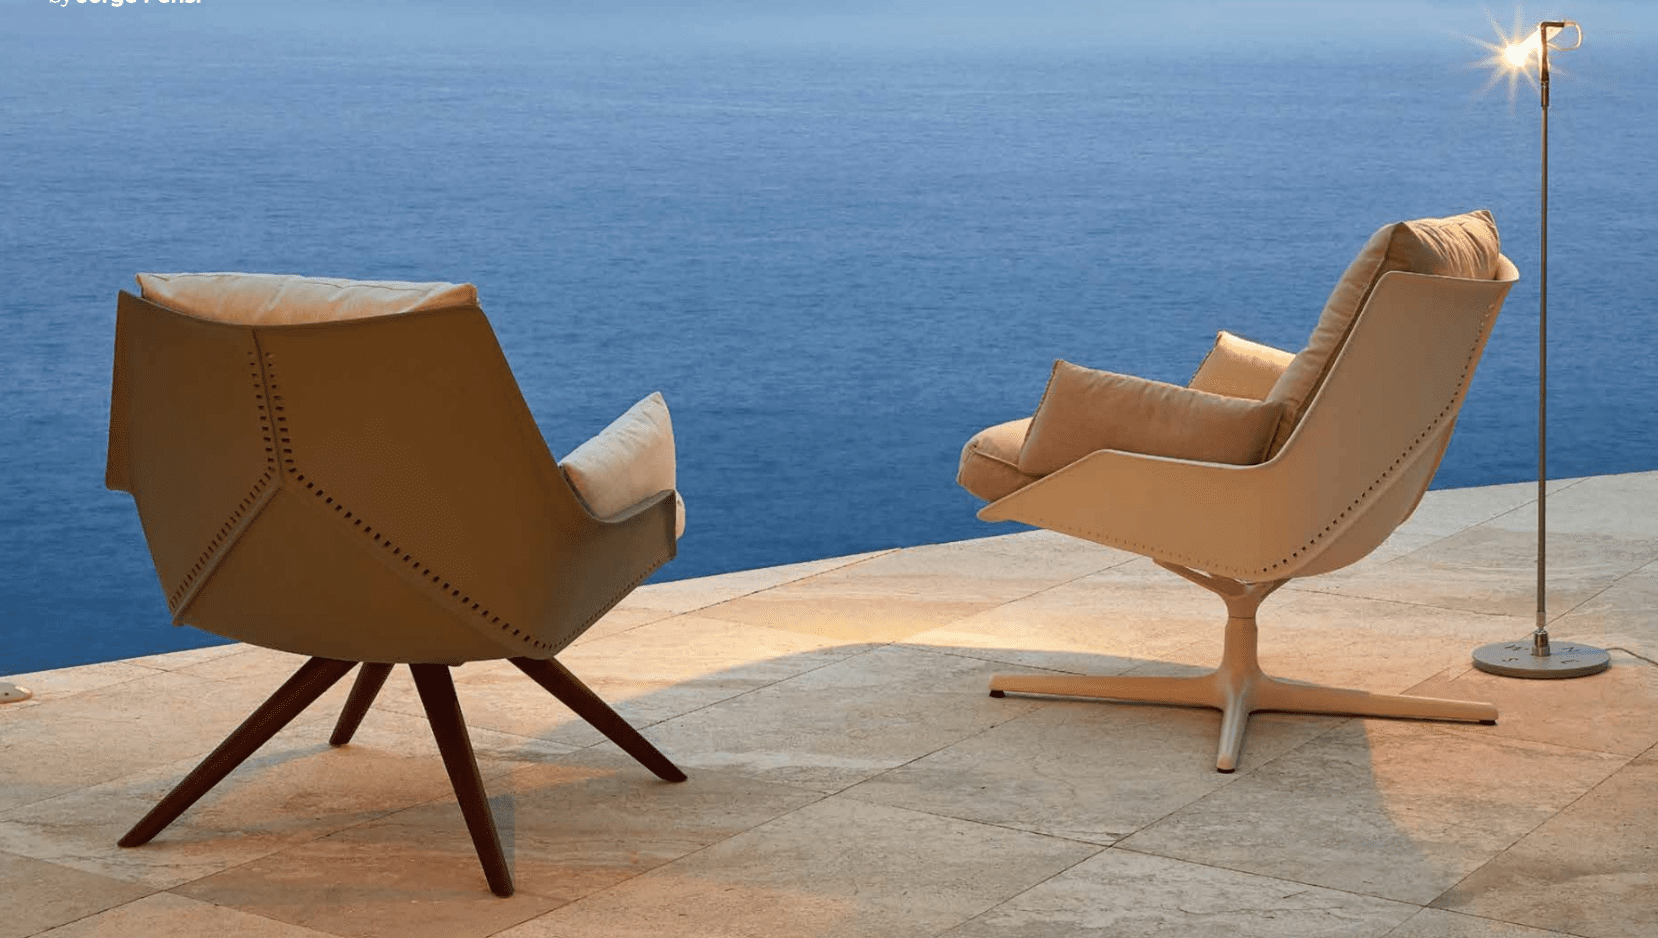 Two chairs on a patio near the ocean.